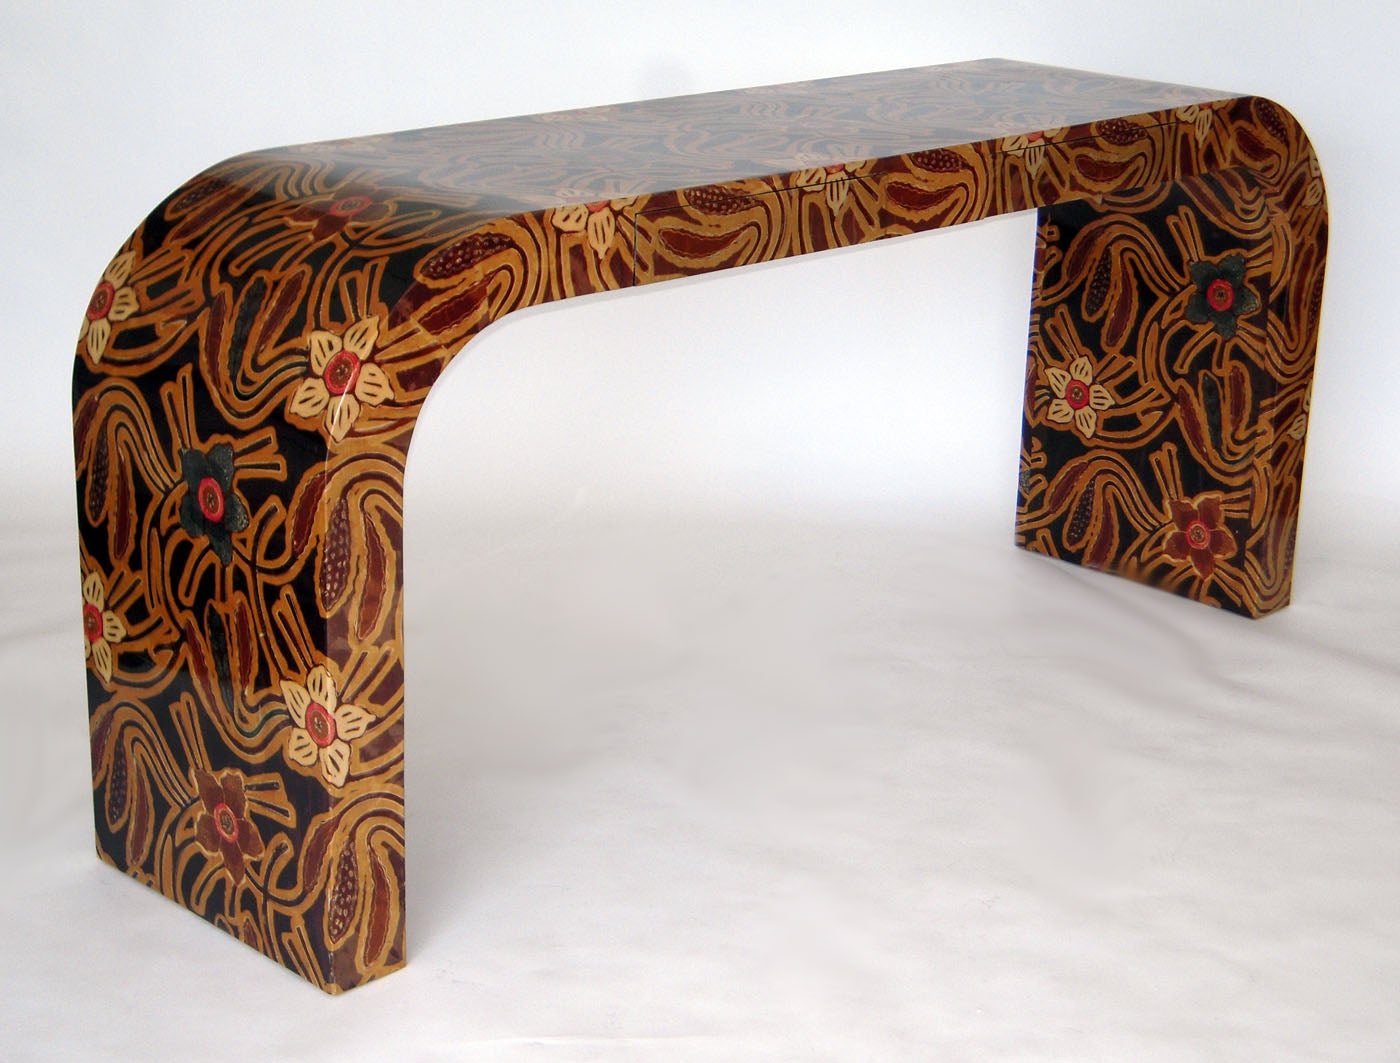 Long Console Table in Lacquered Batik Attributed to Karl Springer